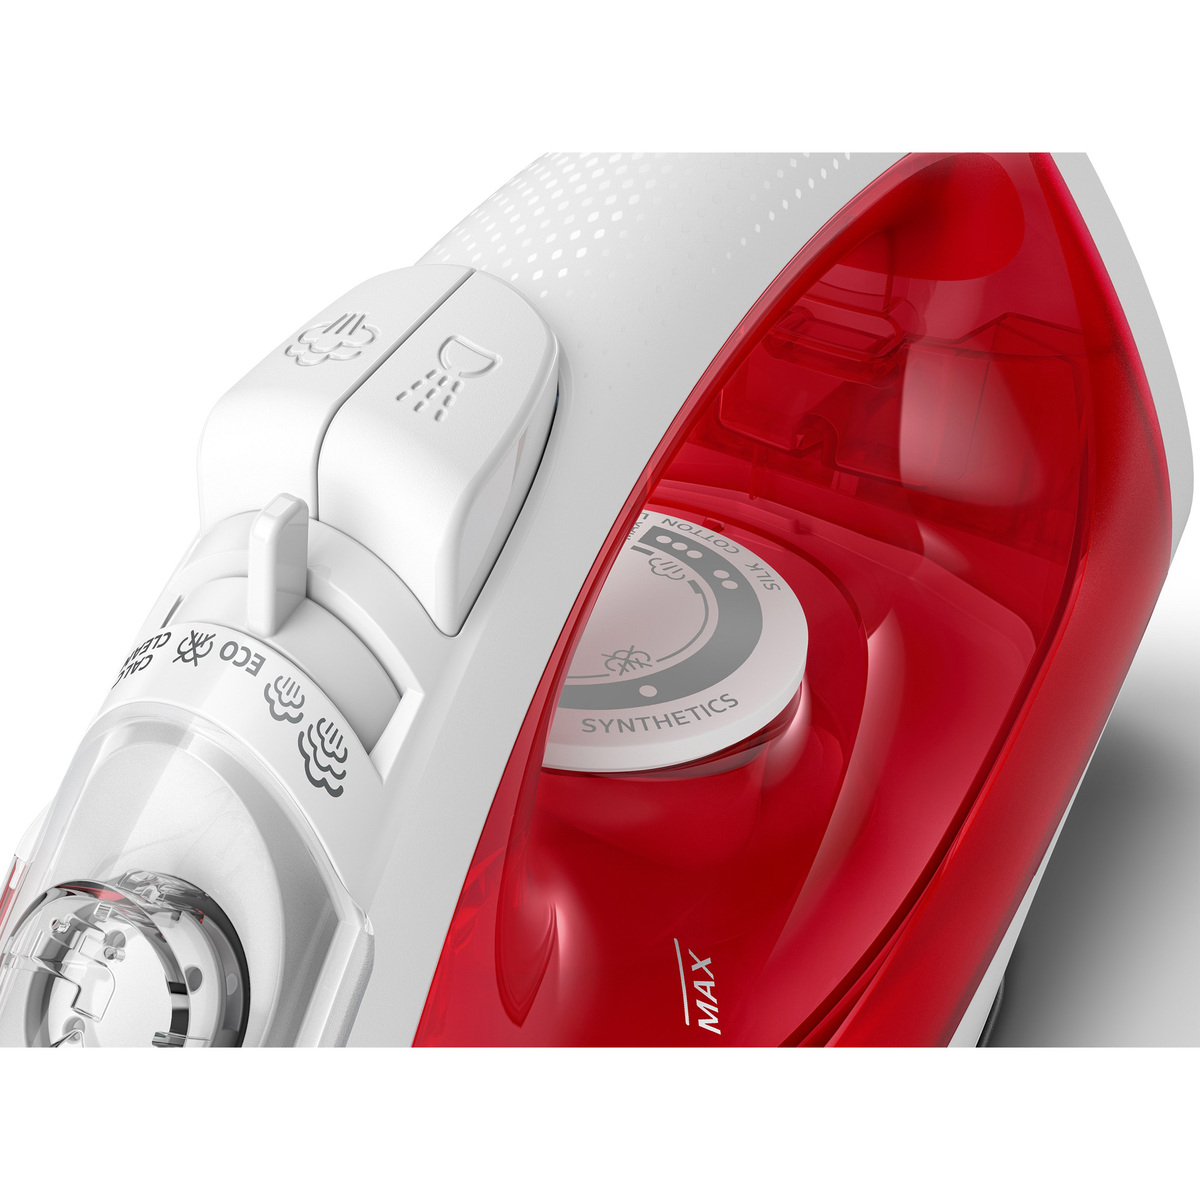 Philips EasySpeed Steam Iron, 2000 W, Red, GC1742/46